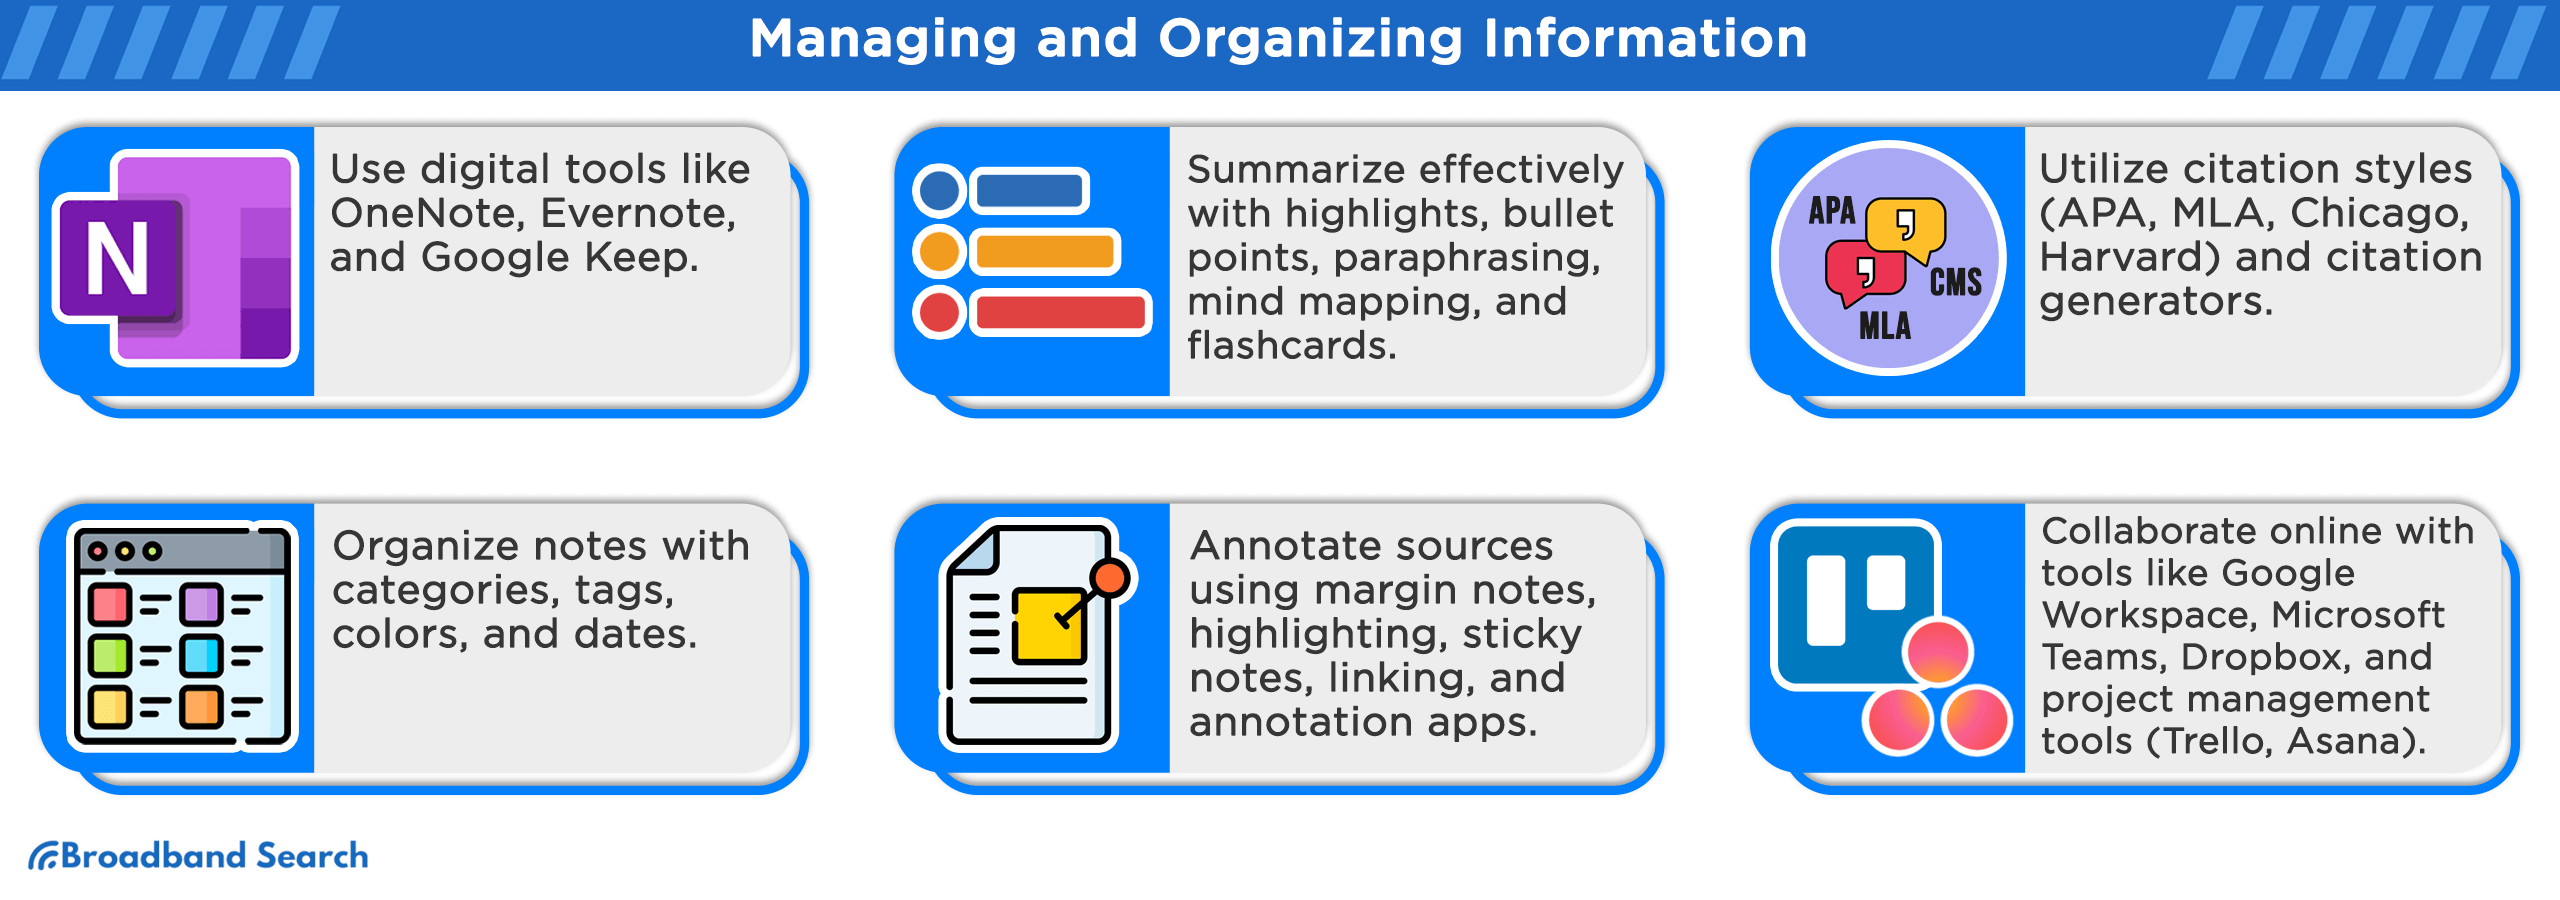 How to manage and organize information